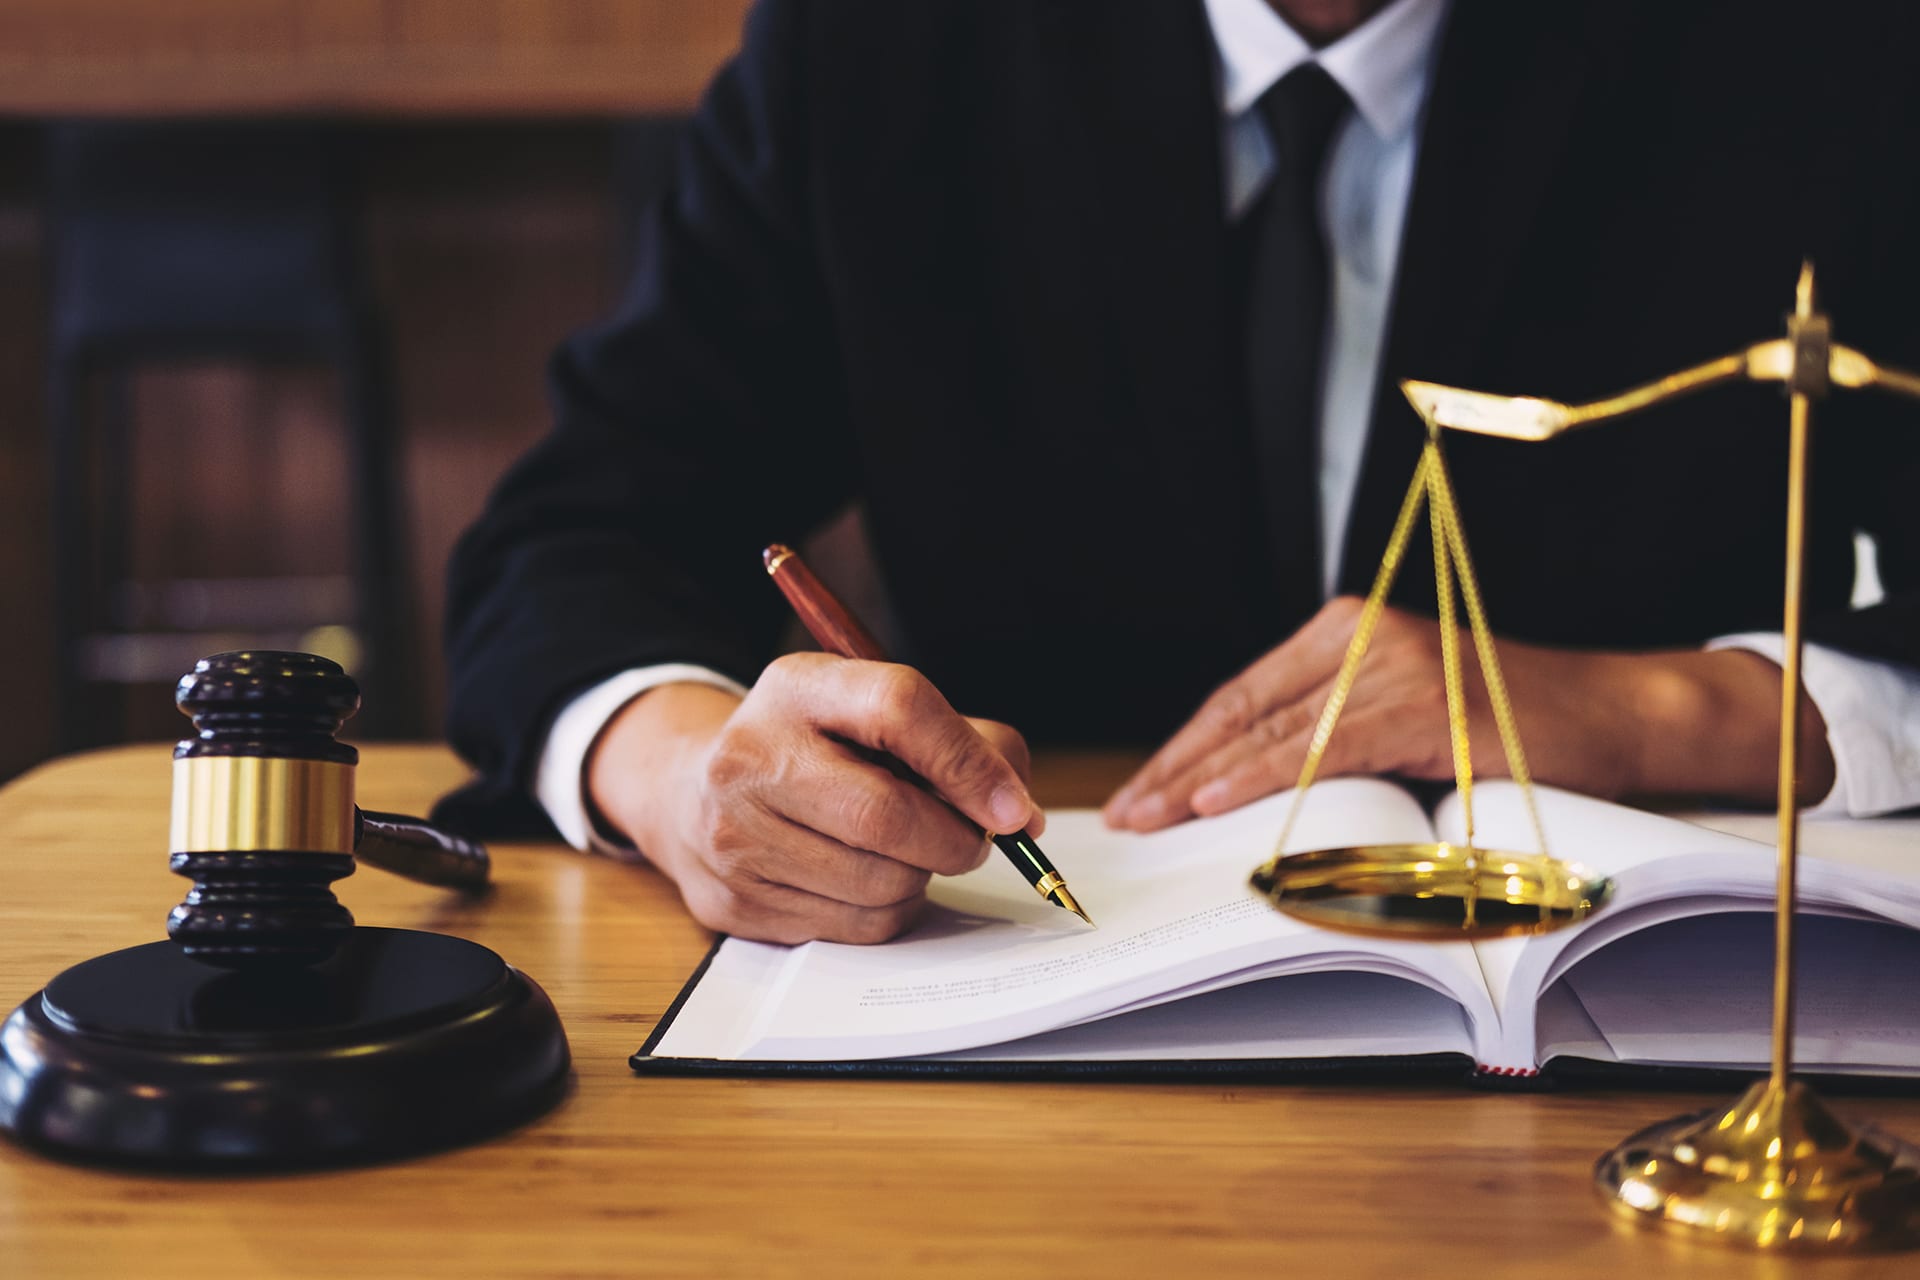 Lawyer working on paper with symbols of justice on table